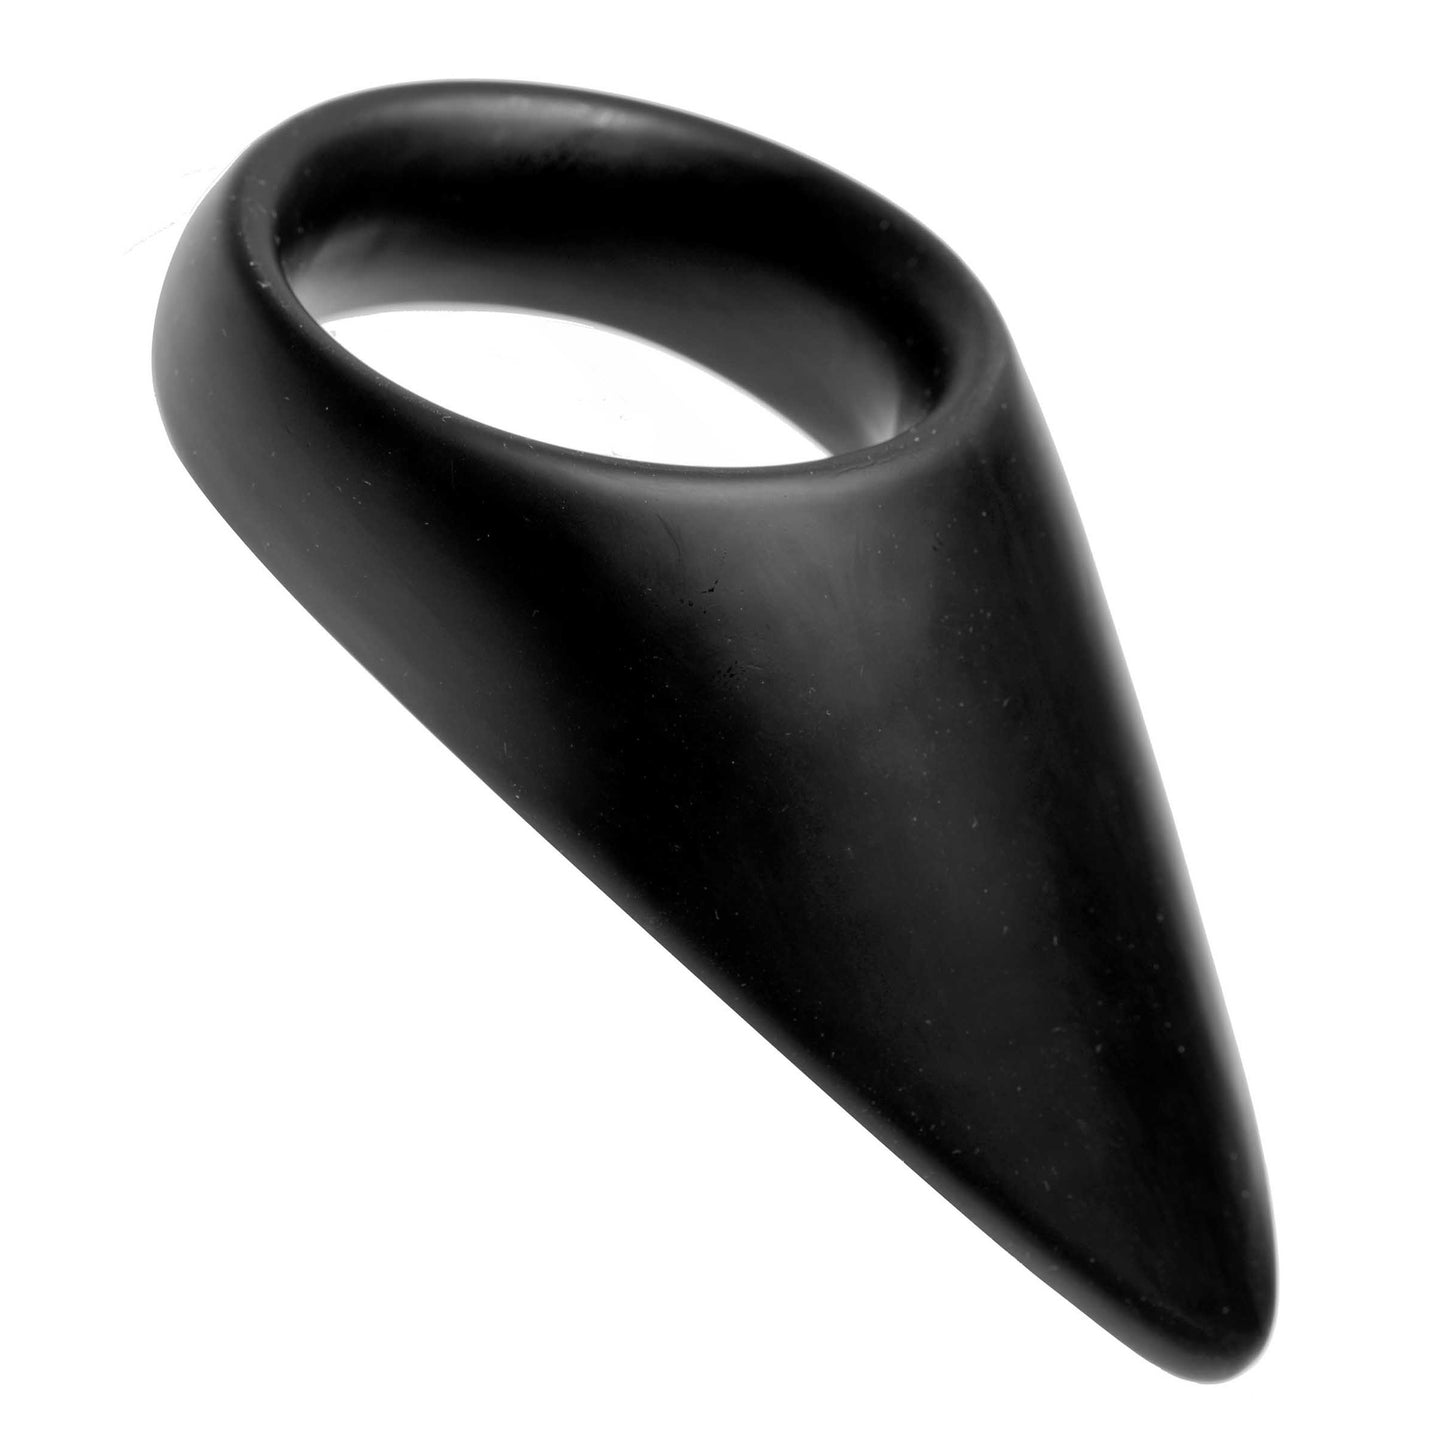 Taint Teaser Silicone Cock Ring And Taint Stimulator - 1.75 Inch